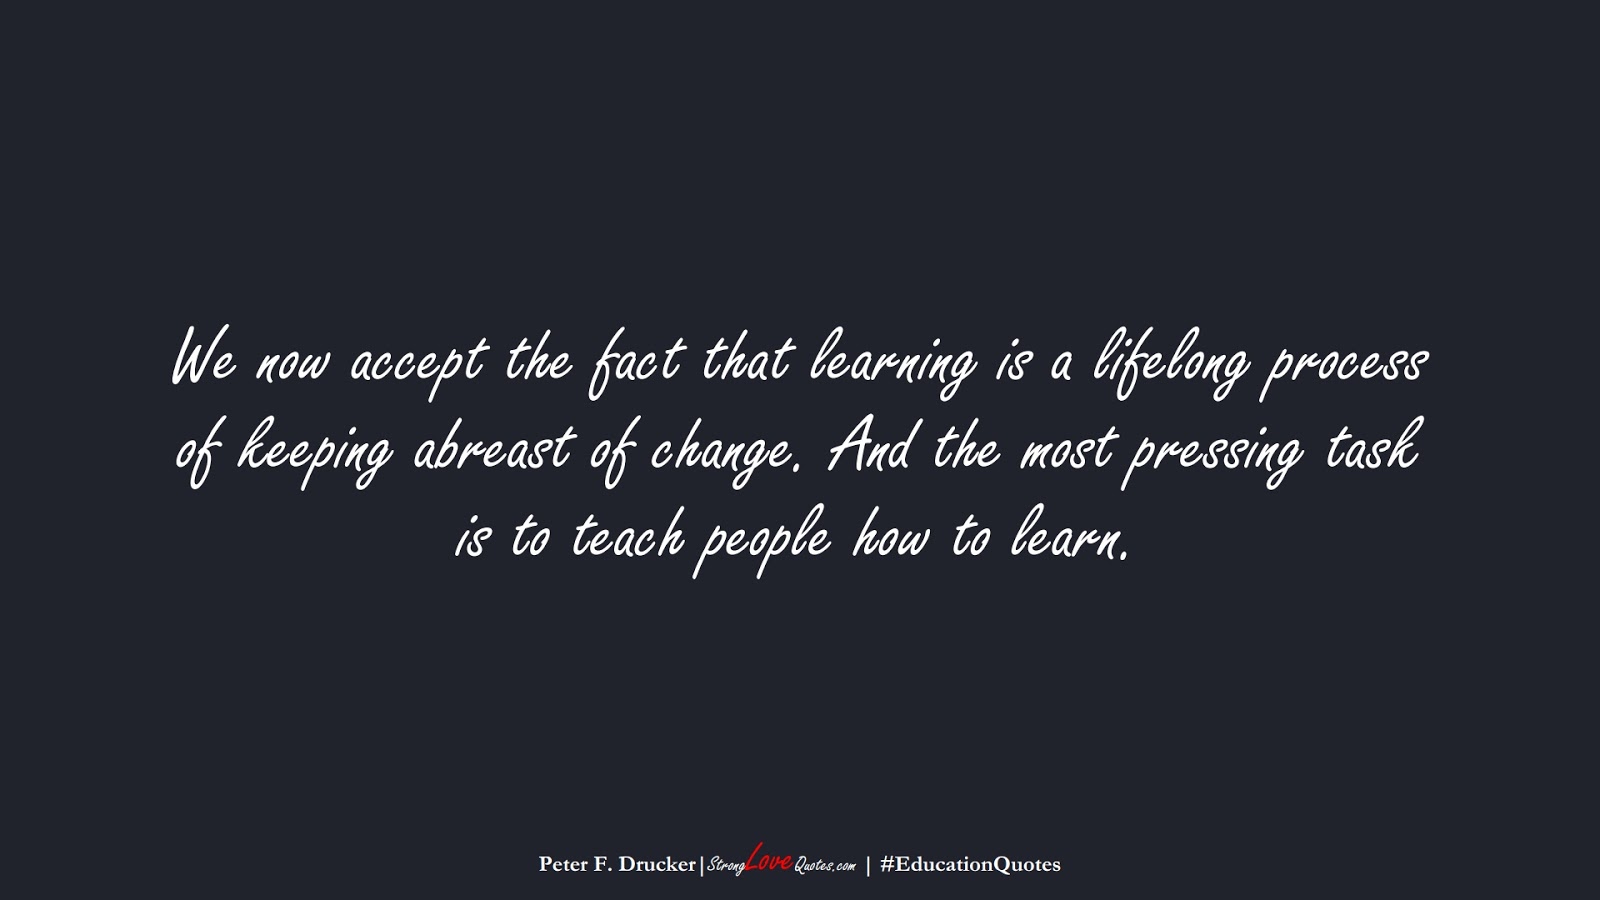 We now accept the fact that learning is a lifelong process of keeping abreast of change. And the most pressing task is to teach people how to learn. (Peter F. Drucker);  #EducationQuotes